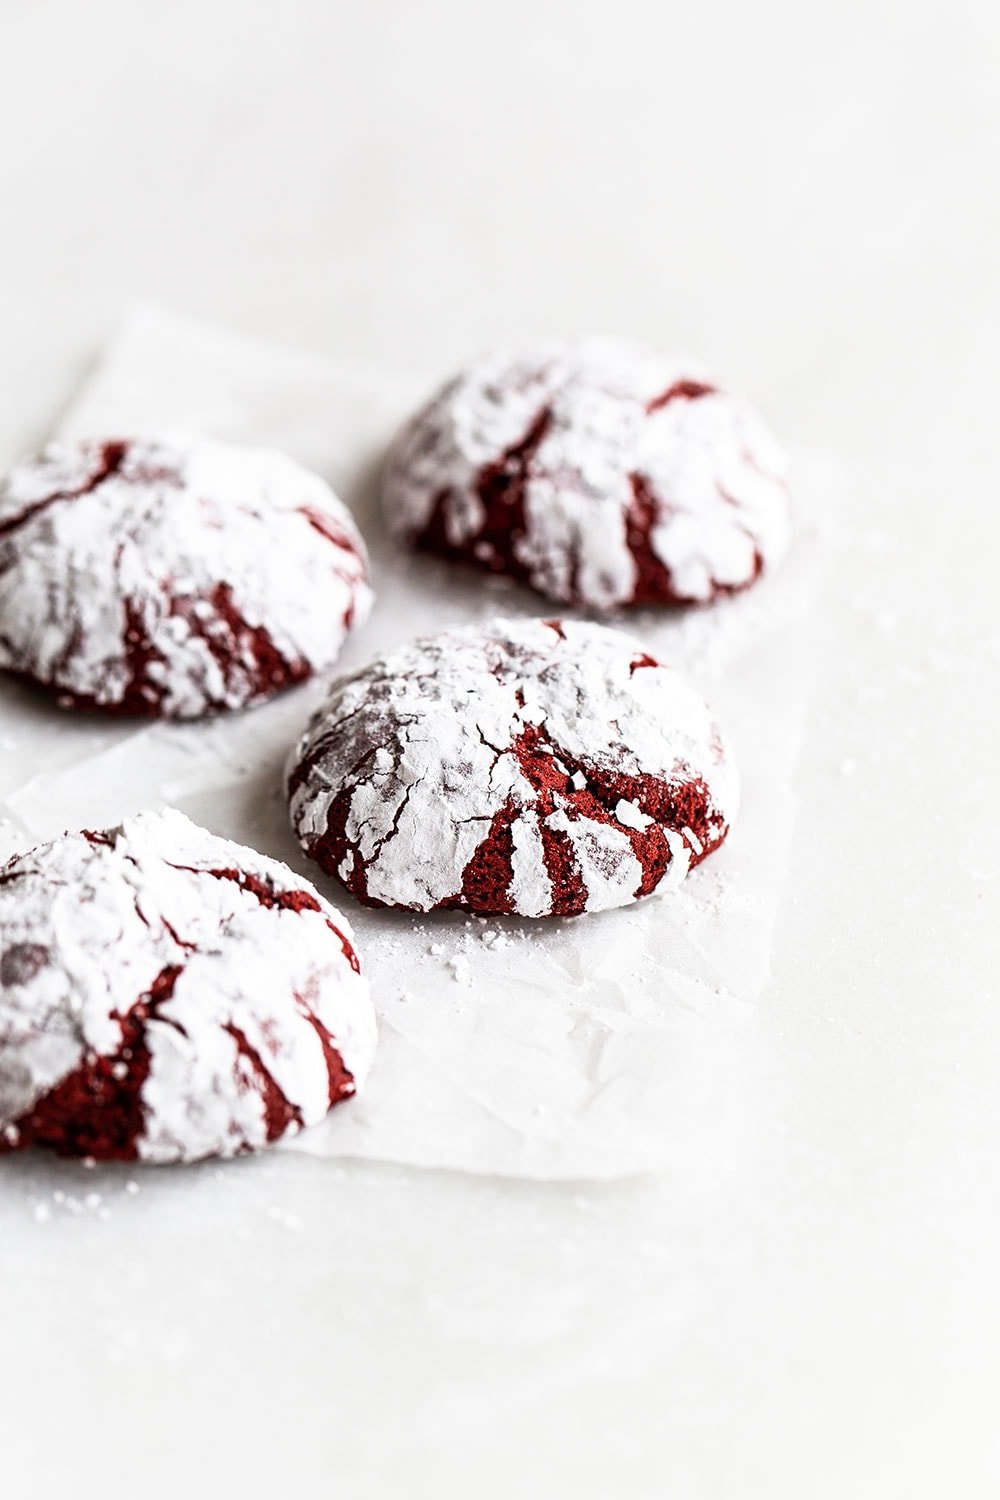 Red Velvet Crinkle Cookies from handletheheat.com on foodiecrush.com